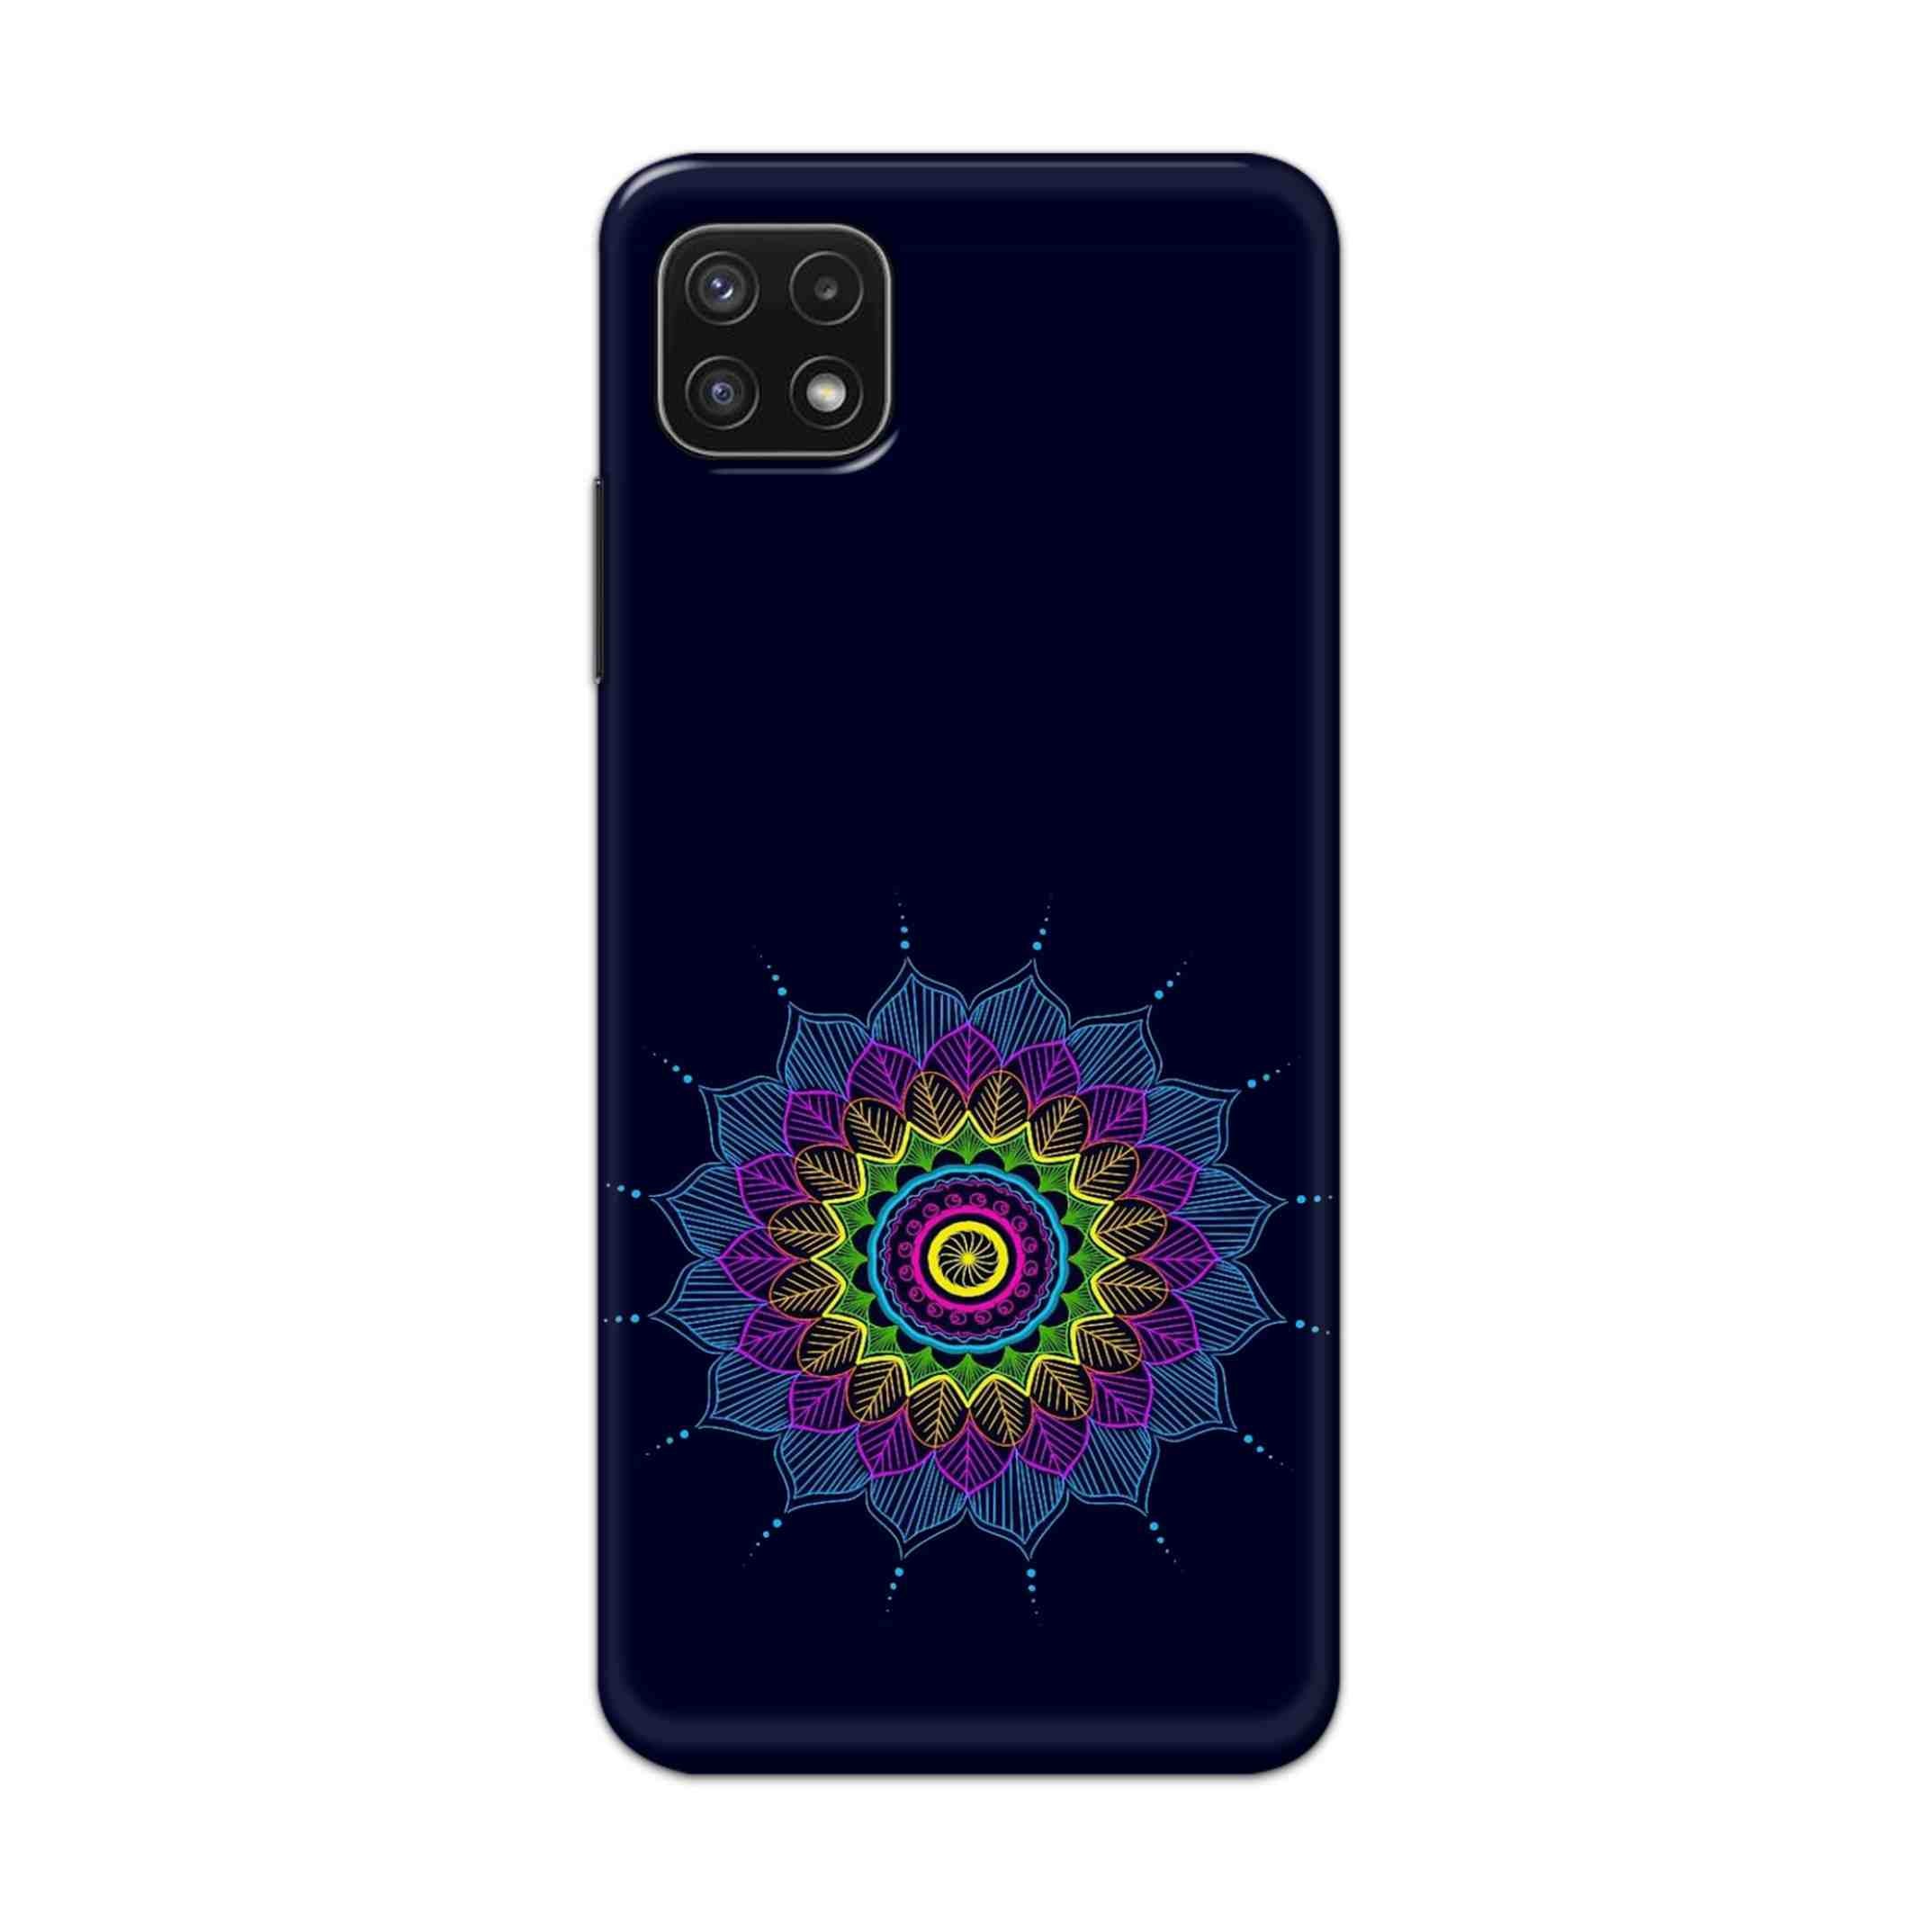 Buy Jung And Mandalas Hard Back Mobile Phone Case Cover For Samsung A22 5G Online